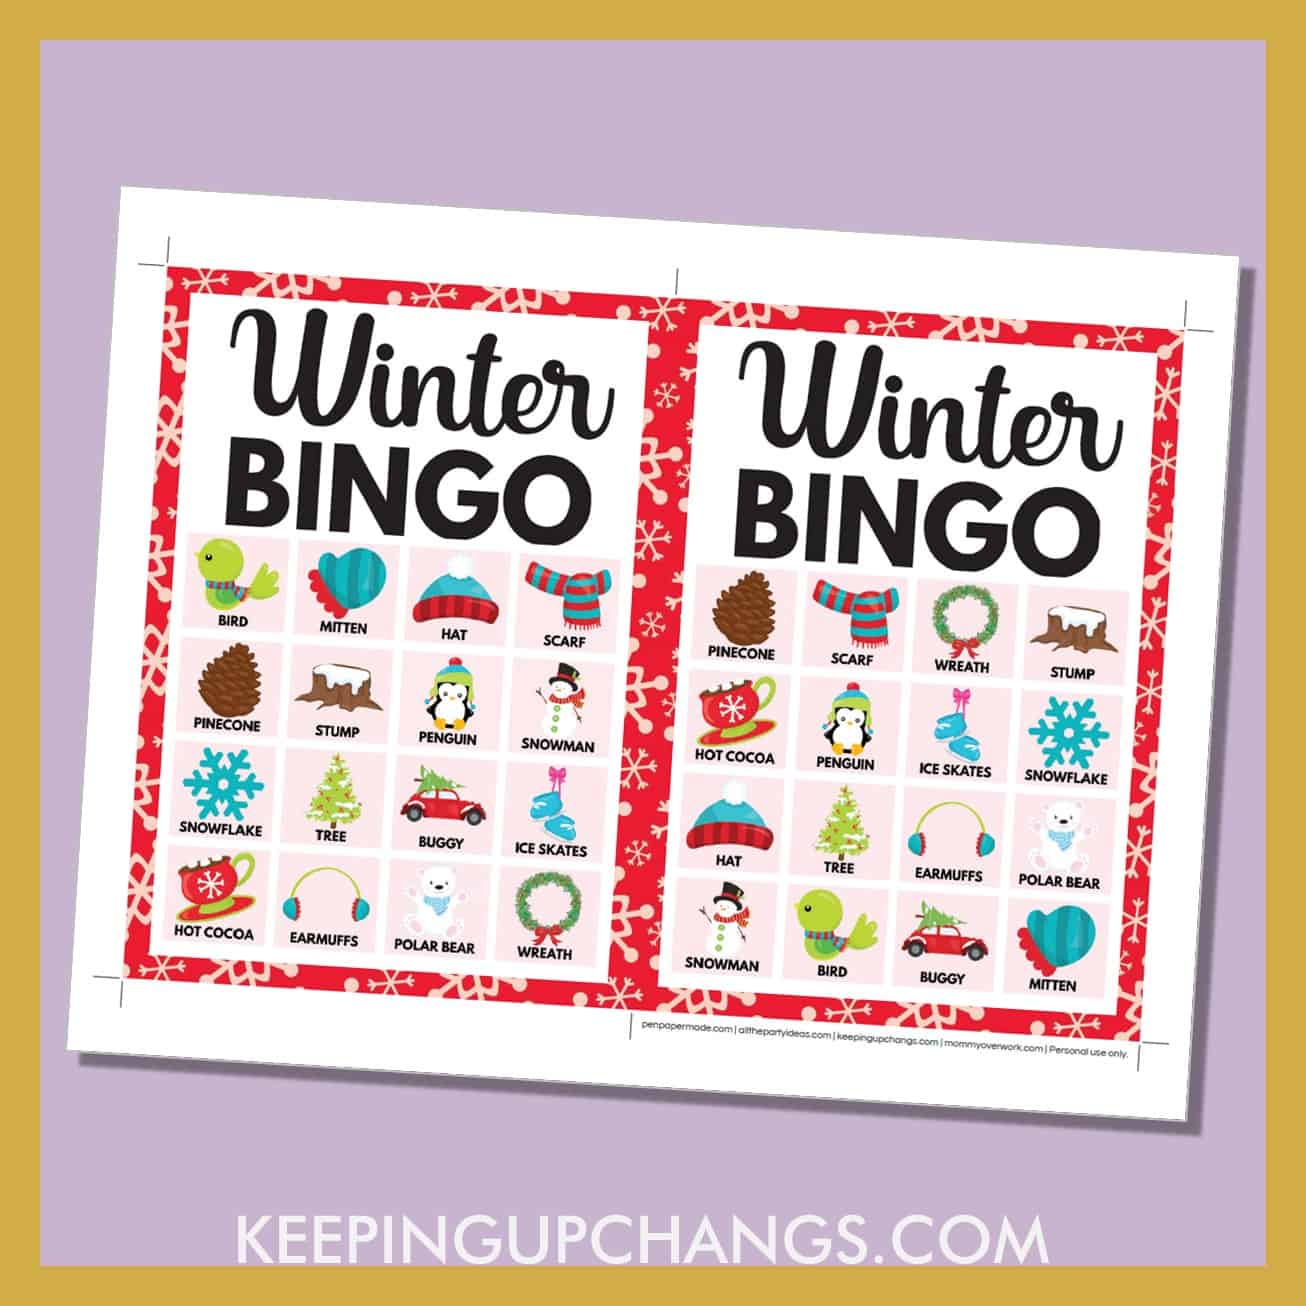 free winter bingo card 4x4 5x7 game boards with images and text words.